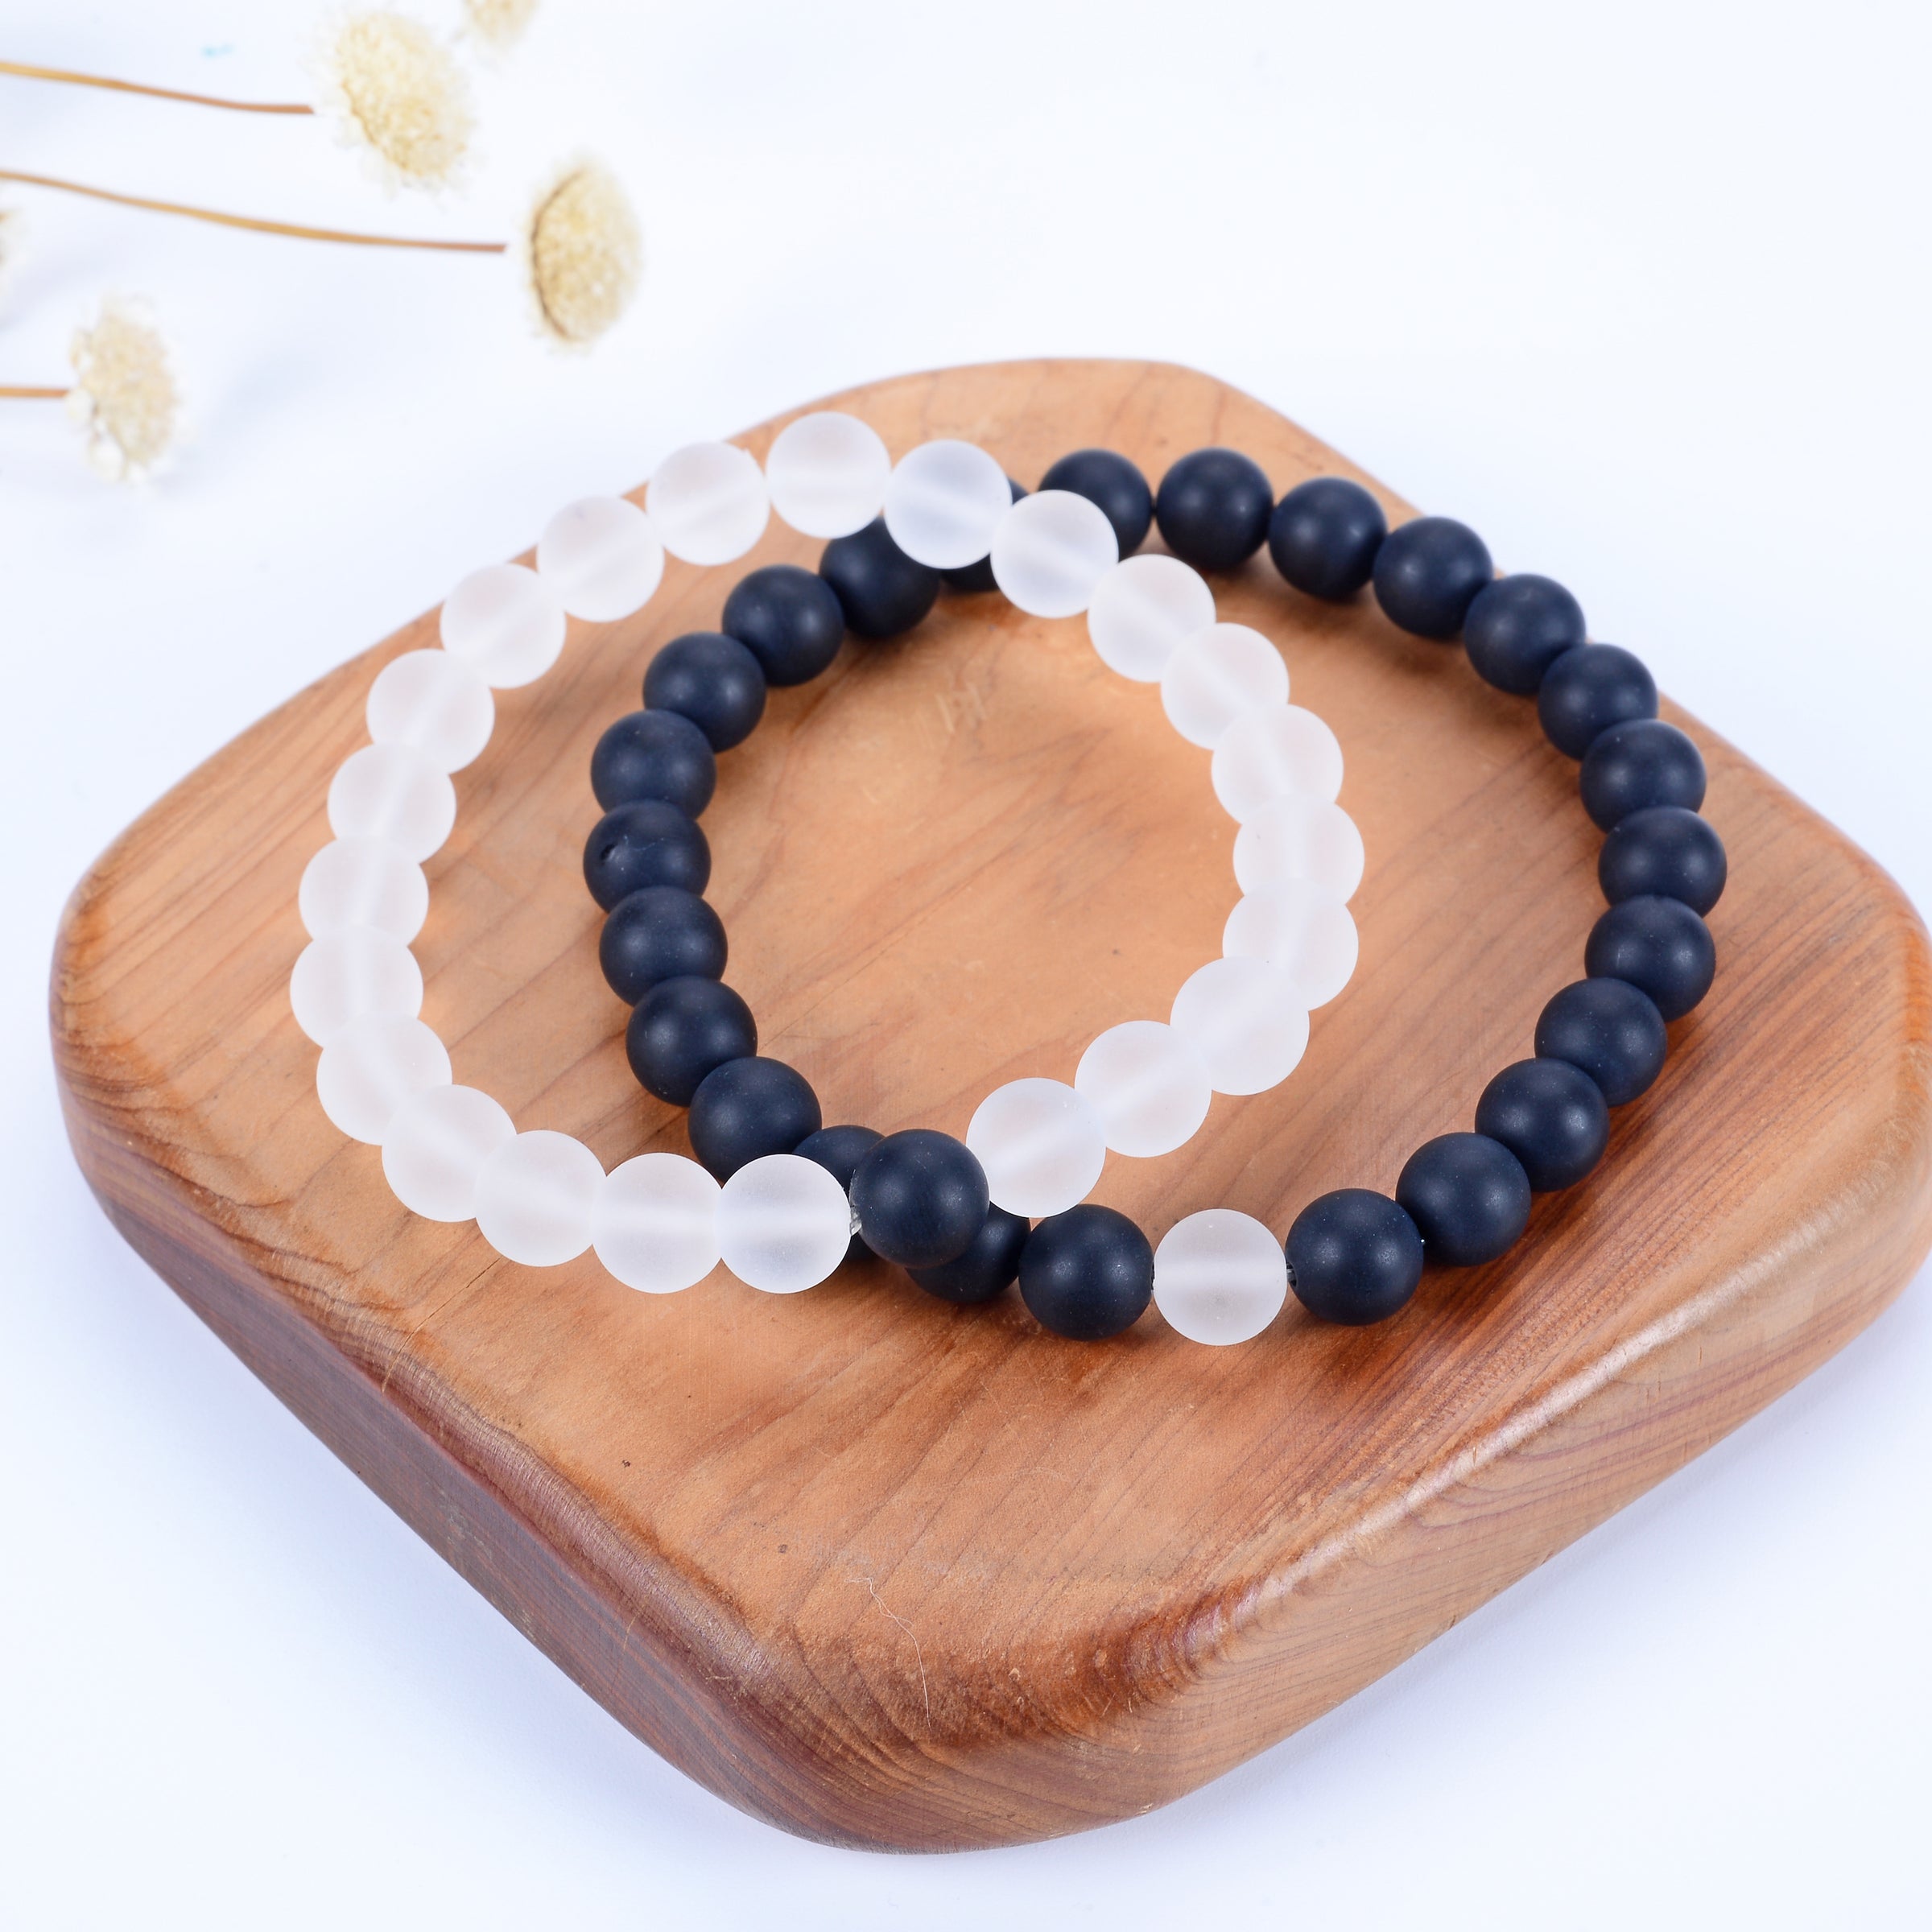 8mm Matted Mens Beaded Bracelets Agate Bracelet For Couples Black Colored  Weathered Stone In Green, Purple, Red, Blue Mix And Match Drop Delivery  From DHgarden DH7W3 From Dh_garden, $0.77